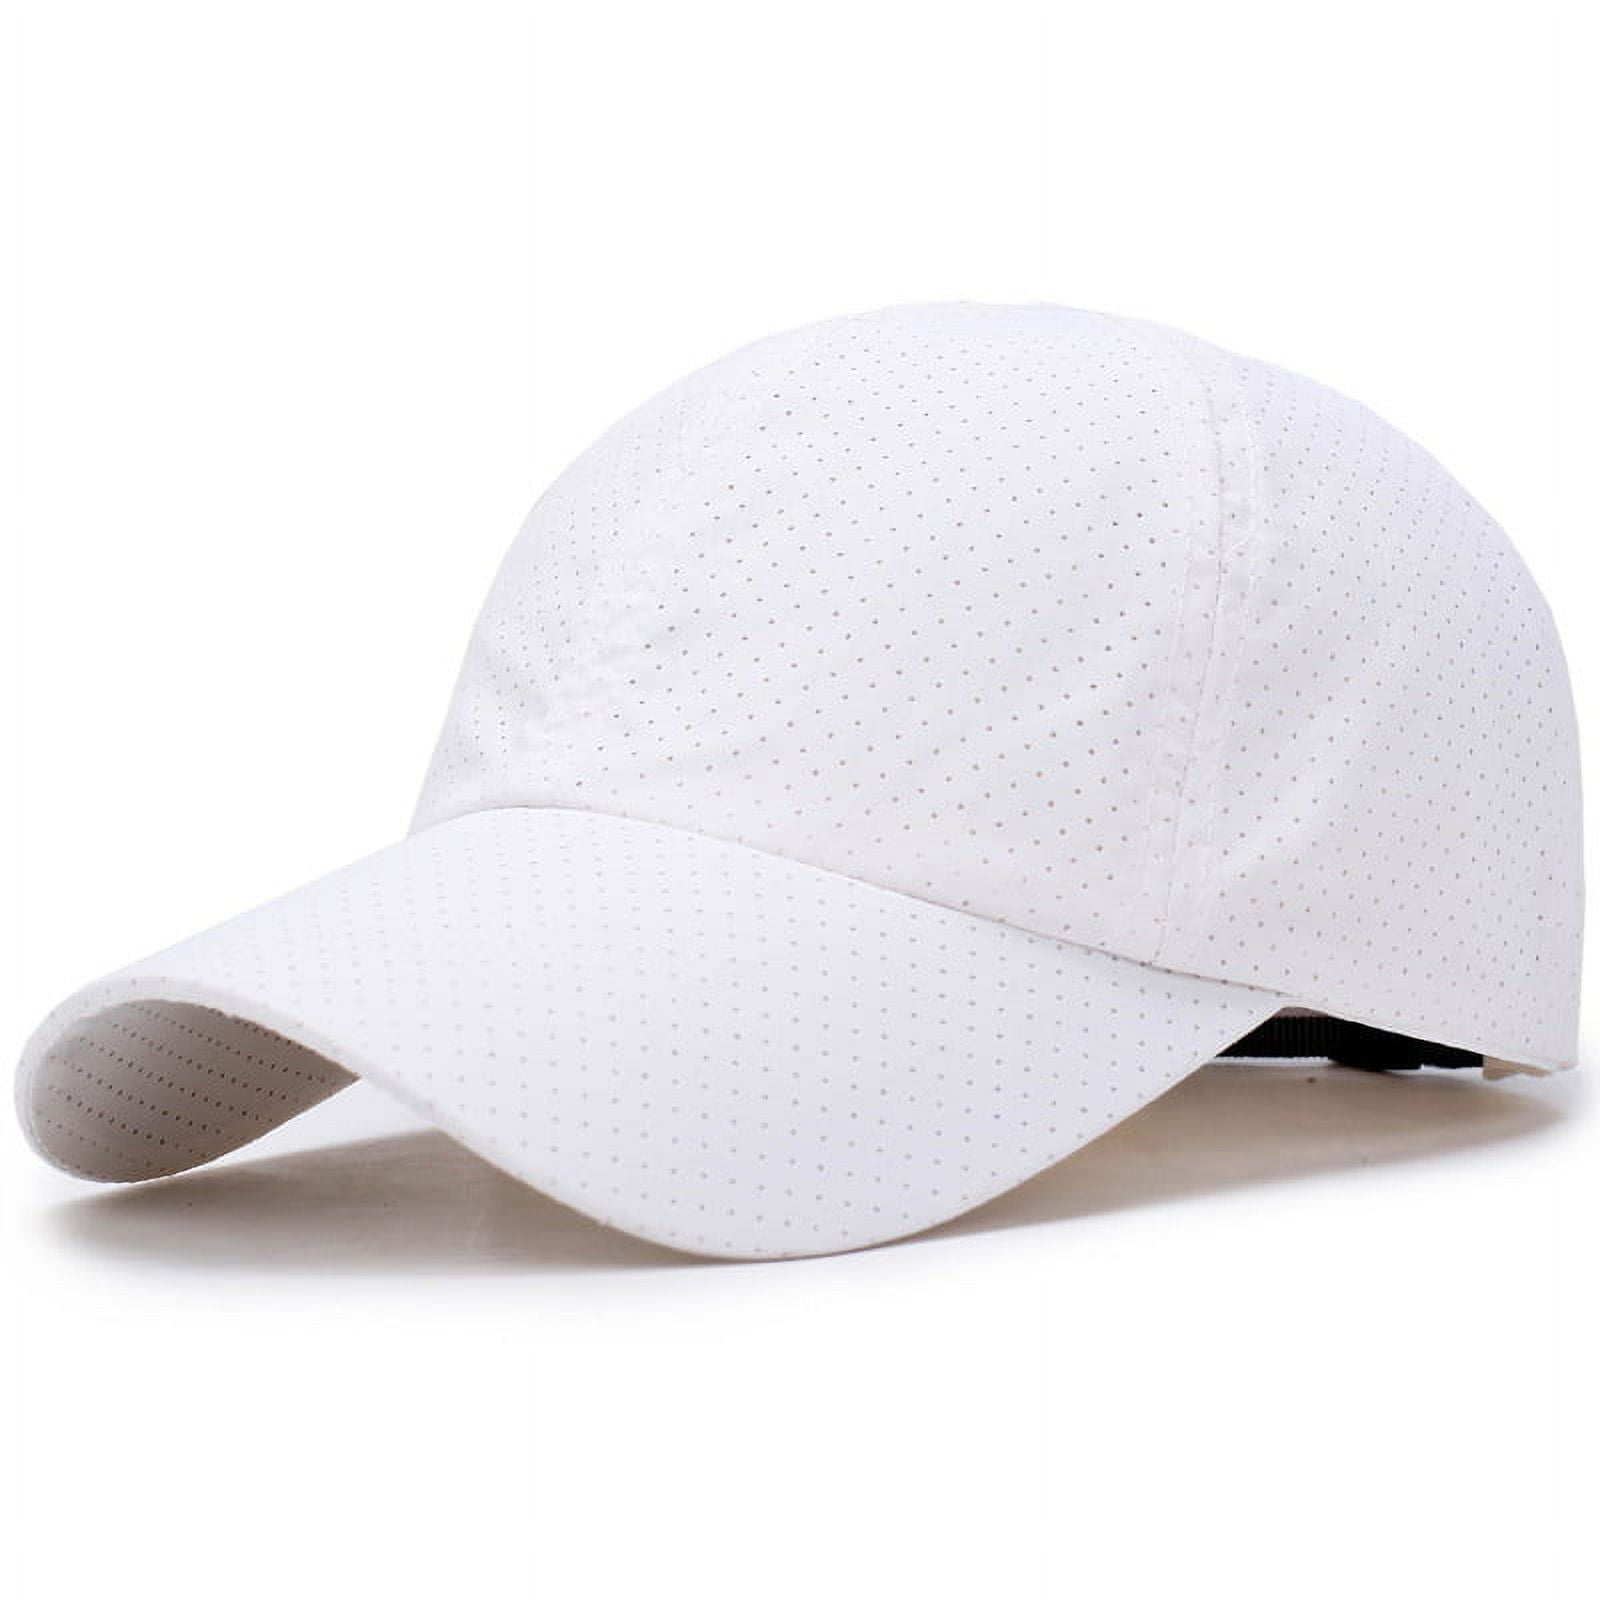 Quick Dry Baseball Cap Lightweight Breathable Soft Run Cap Unisex Used In  Running Hiking Camping Fishing 